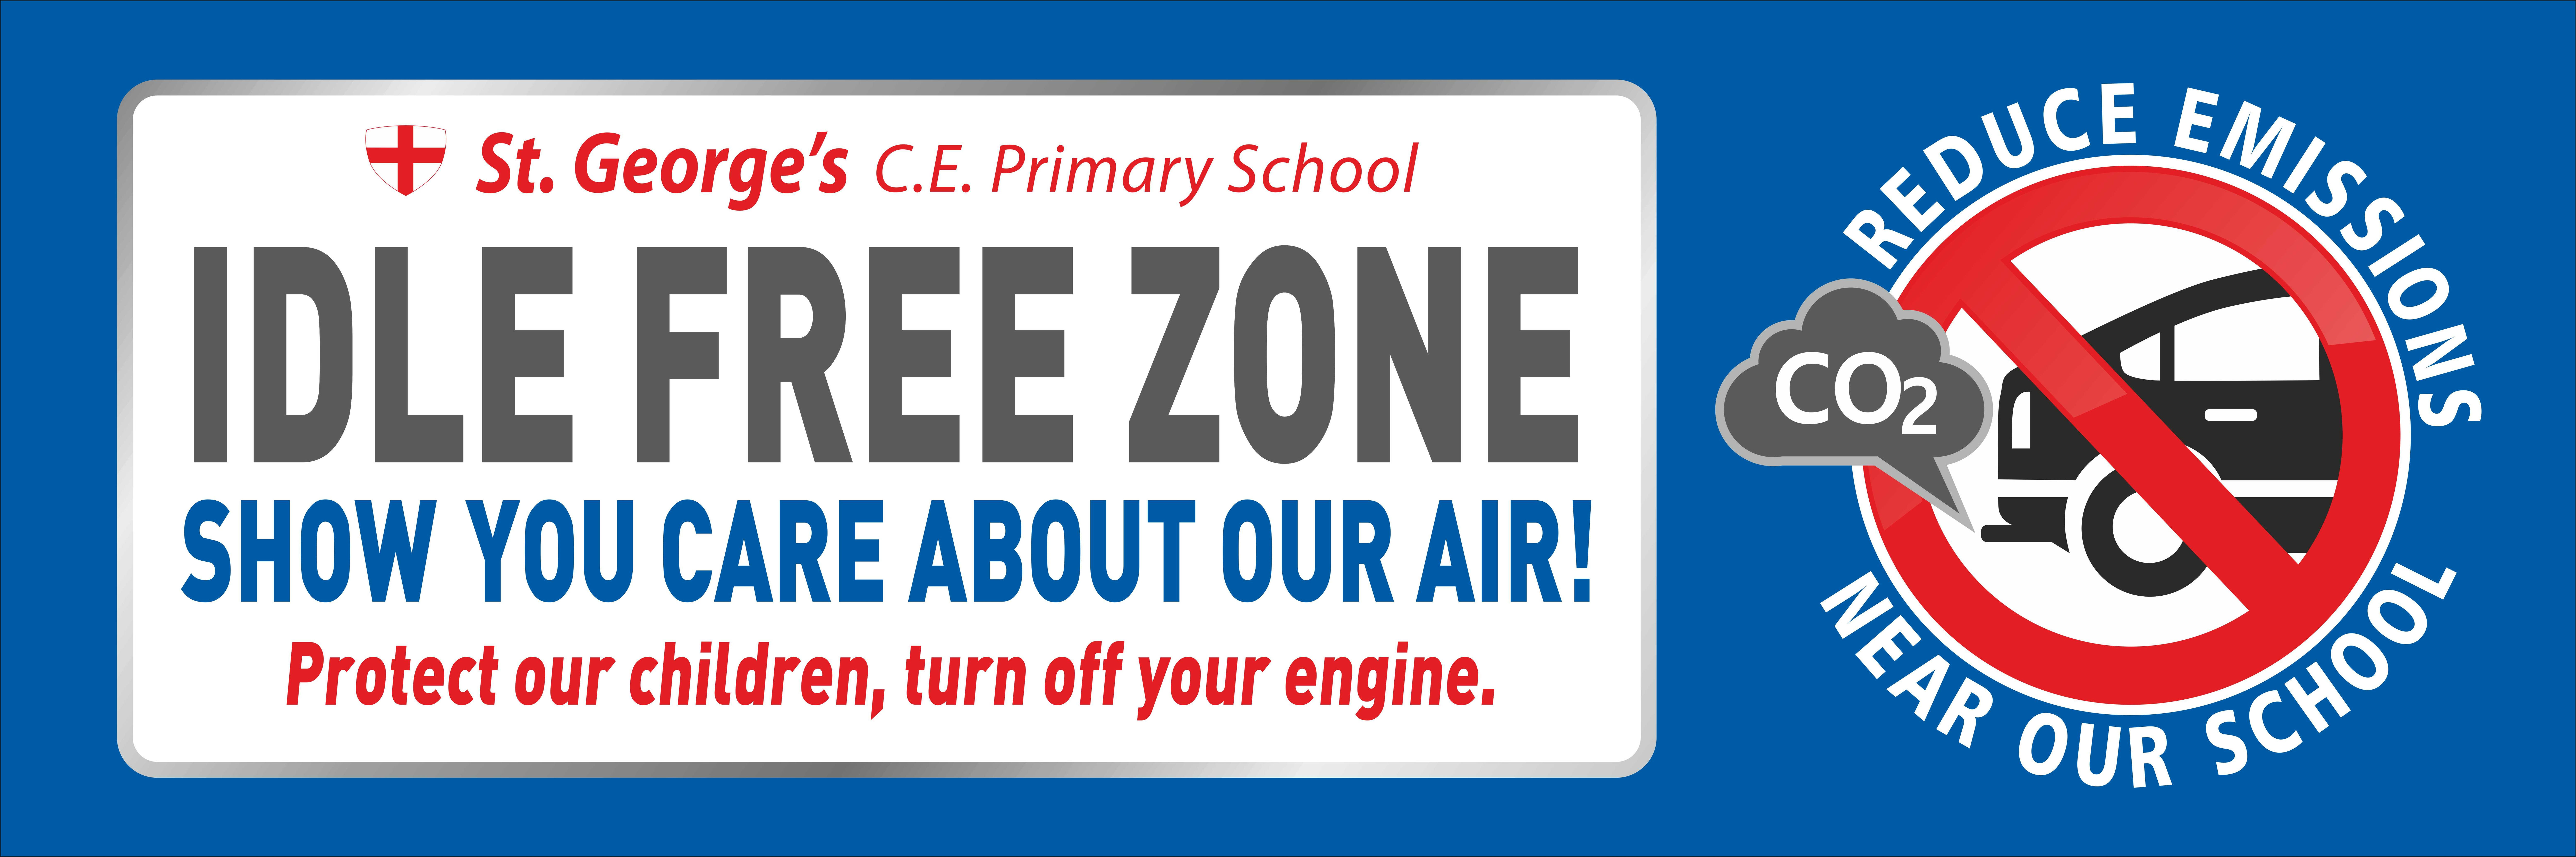 Idle Free Zone banner